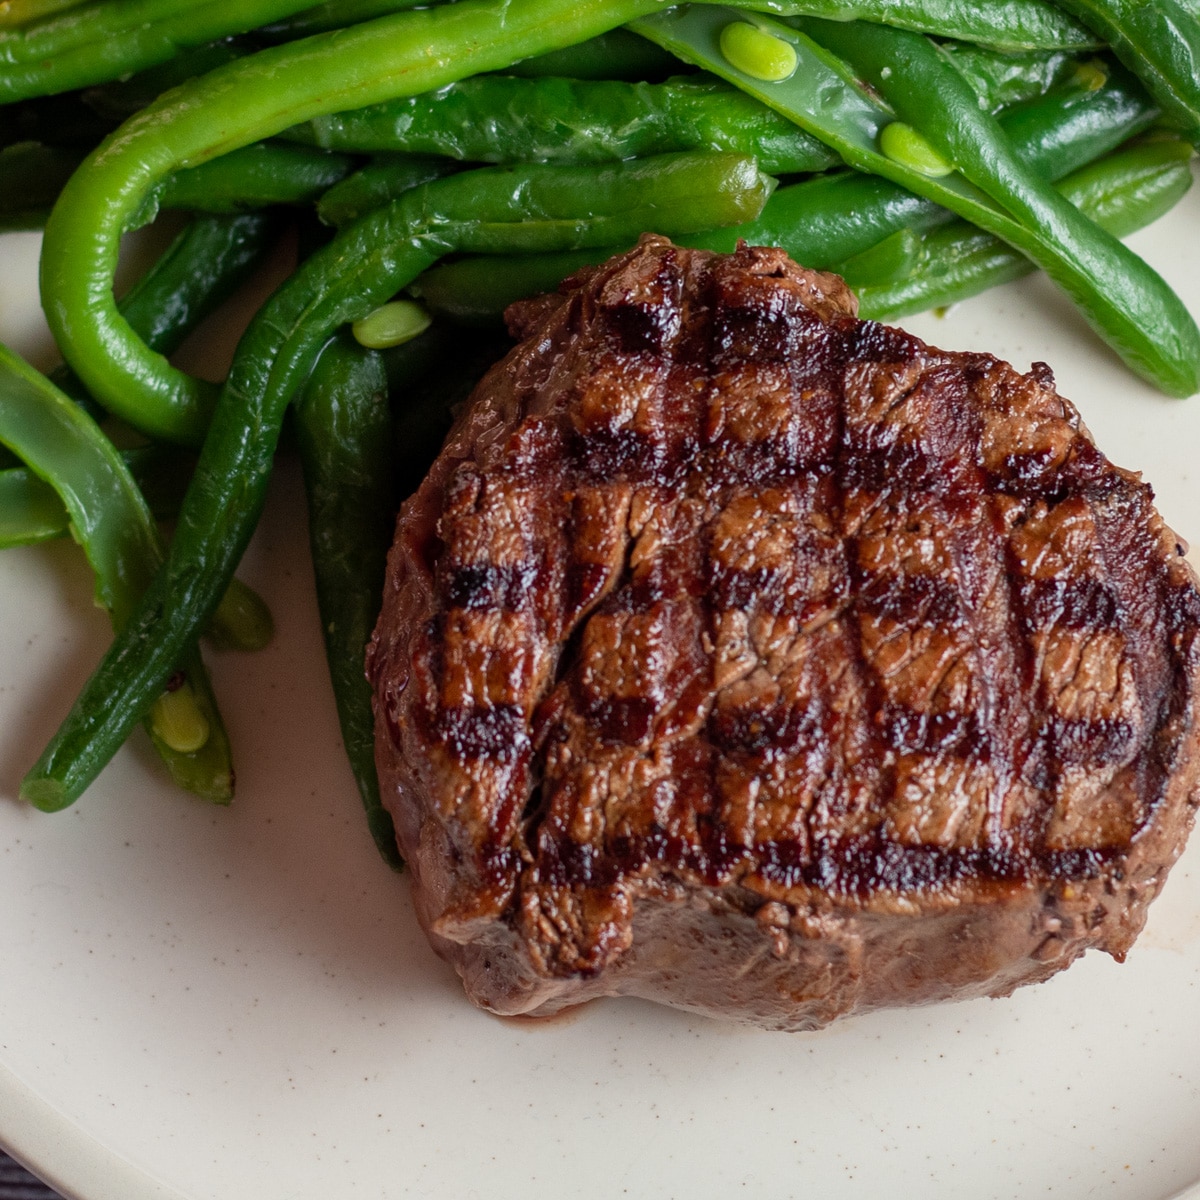 Square image of grilled filet mignon on a plate with green beans.